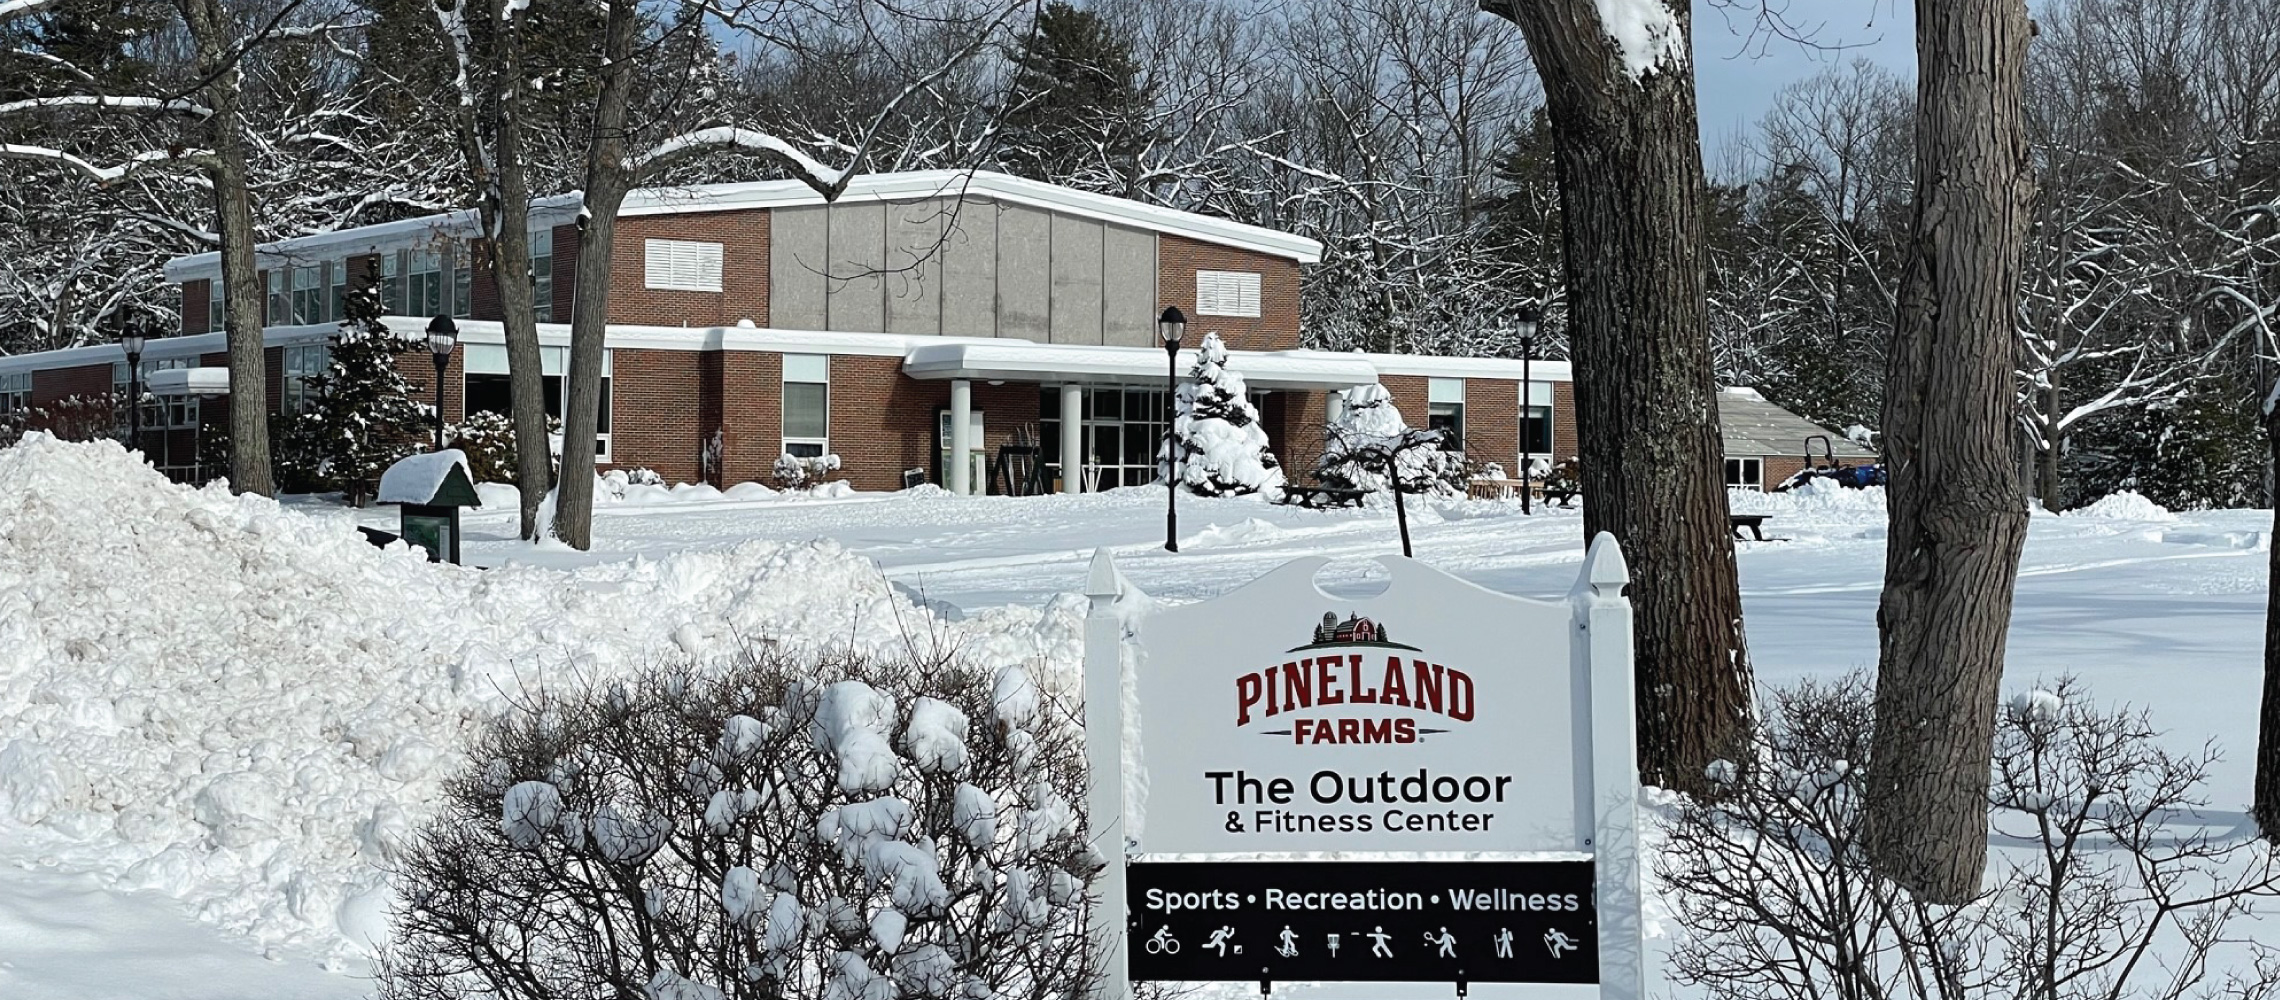 Pineland Farms Outdoor Center in winter with snow